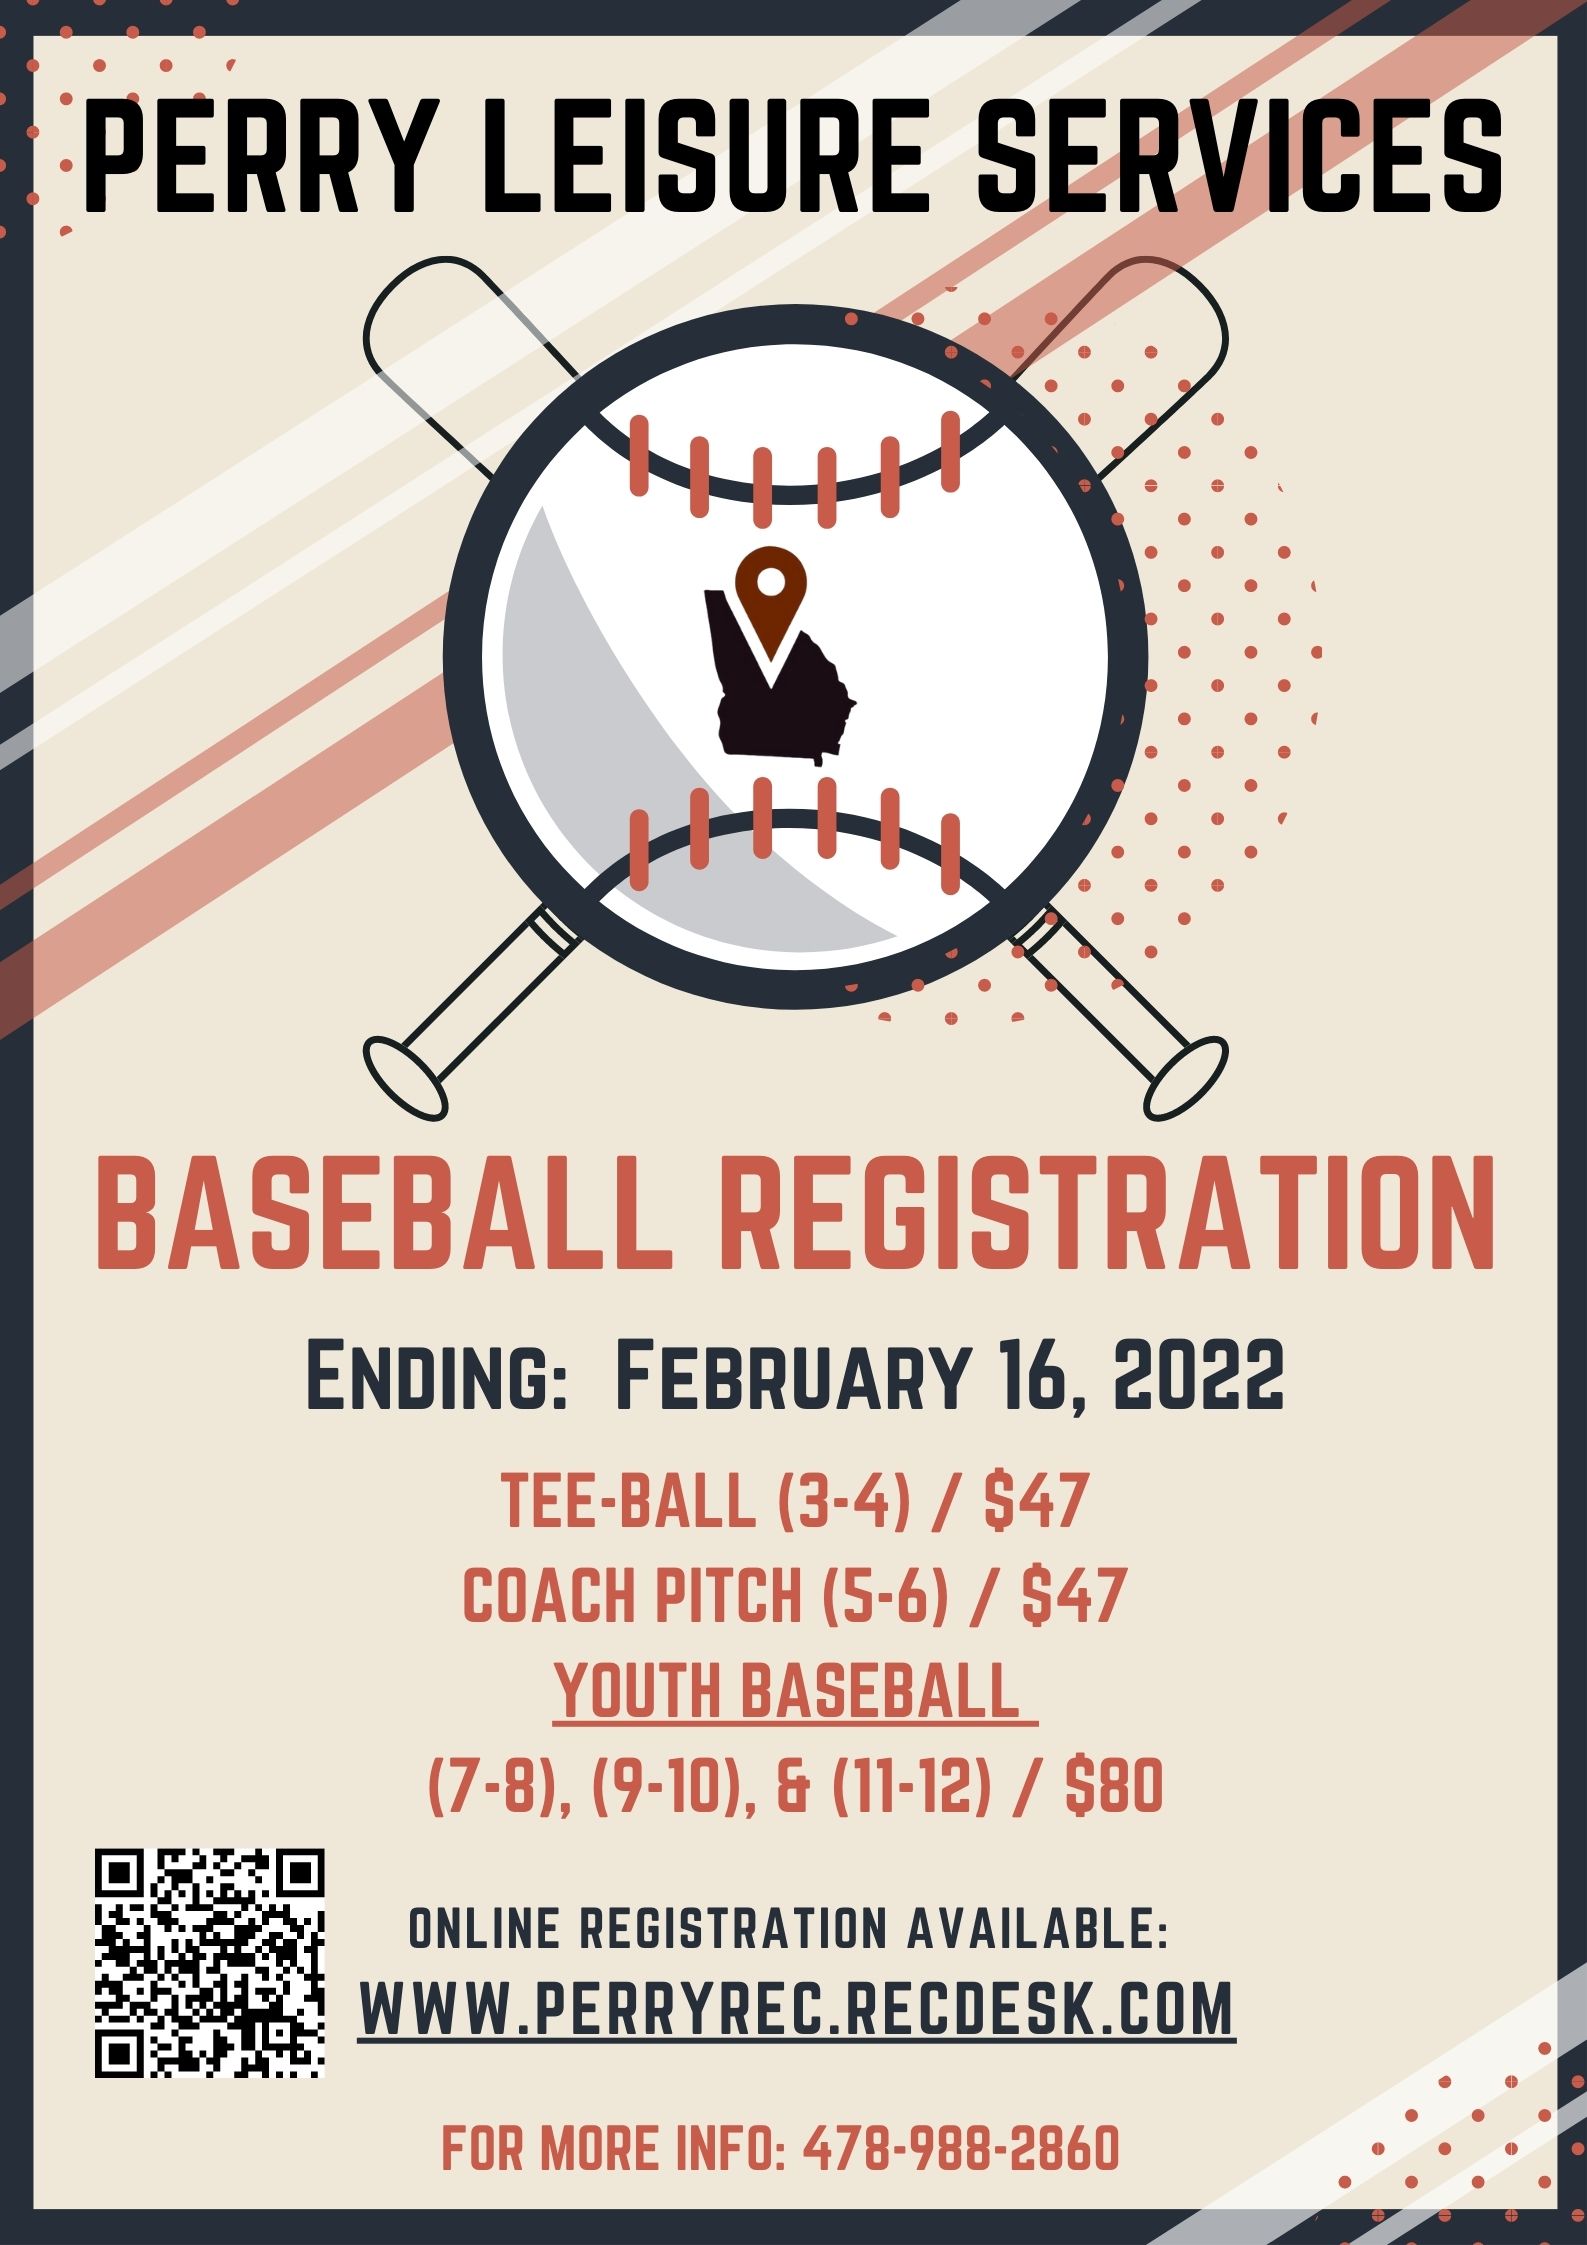 Photo for Now Registering Youth Baseball and Soccer